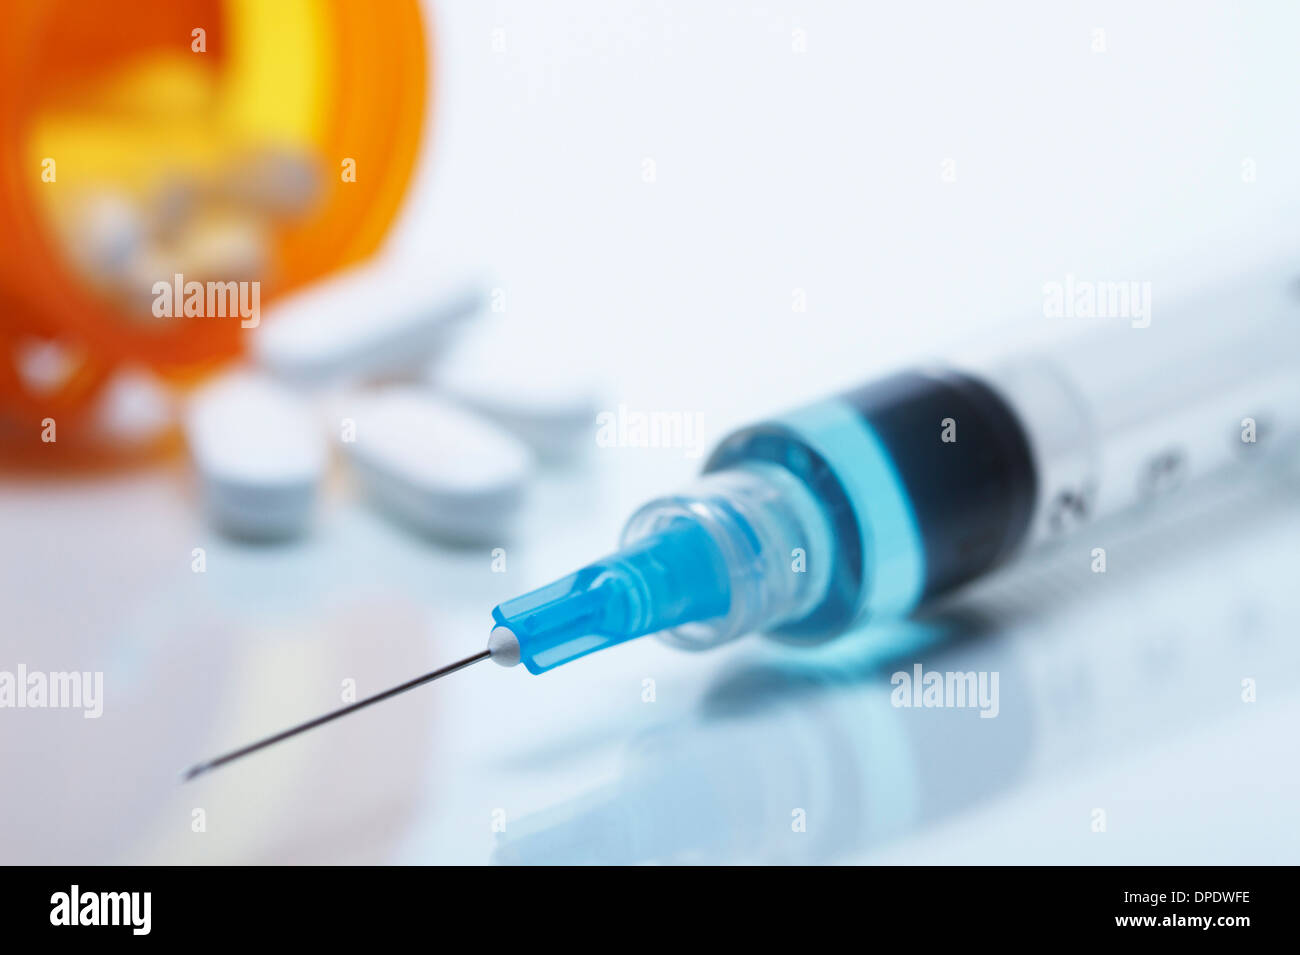 Disposable plastic medical syringe with attached hypodermic needle. Pill bottle and pills in the background Stock Photo